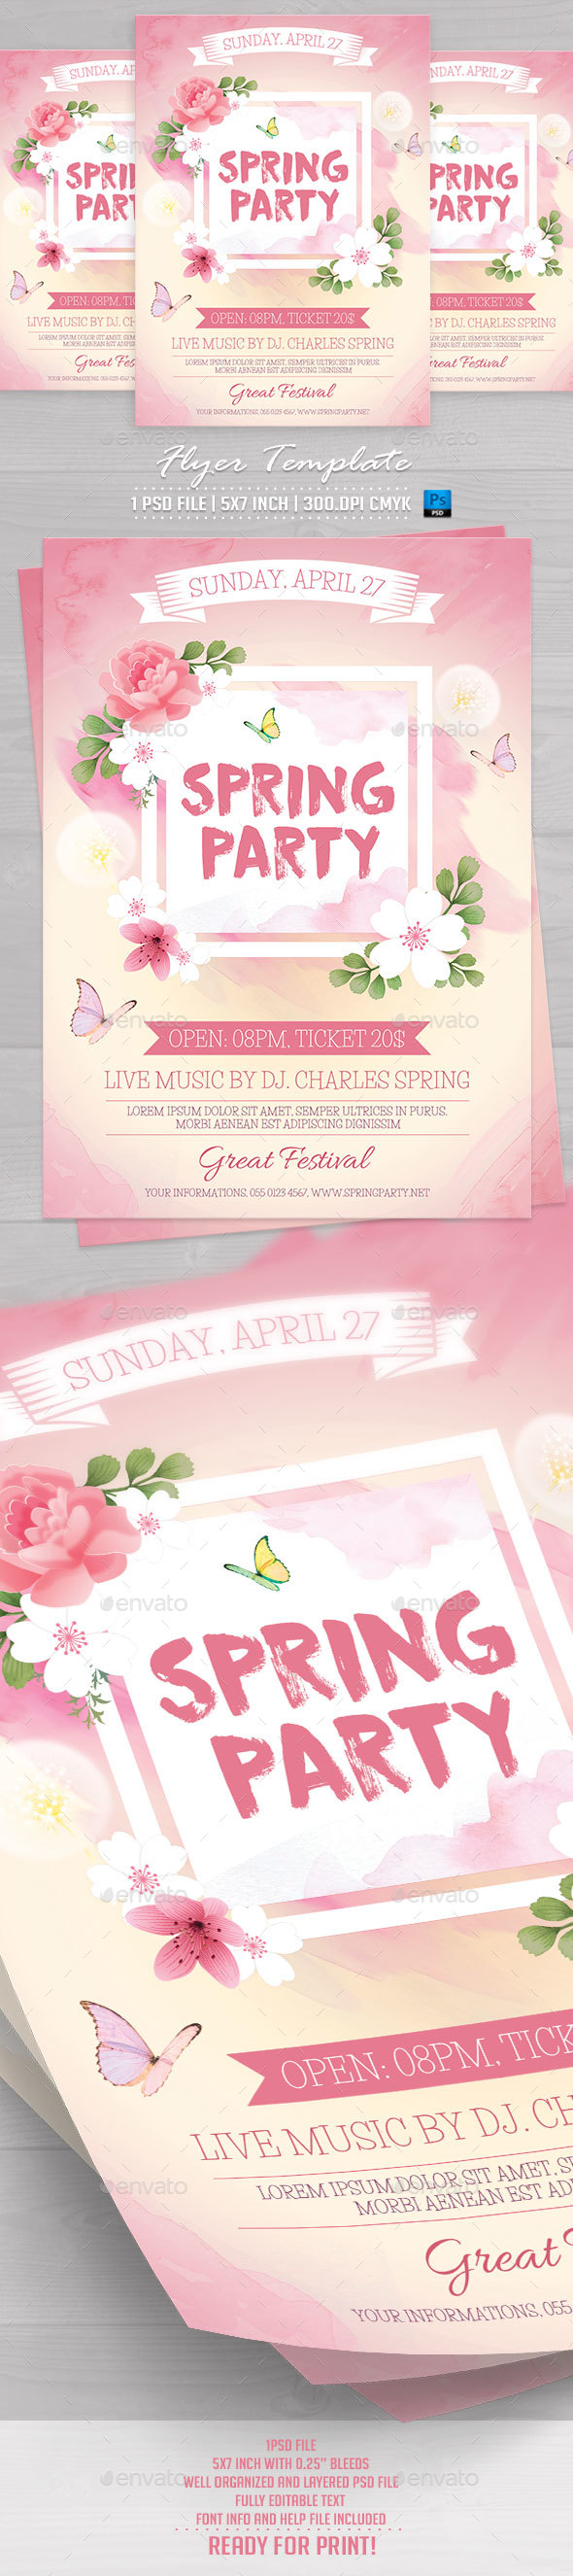 Spring Party Flyer Template v3